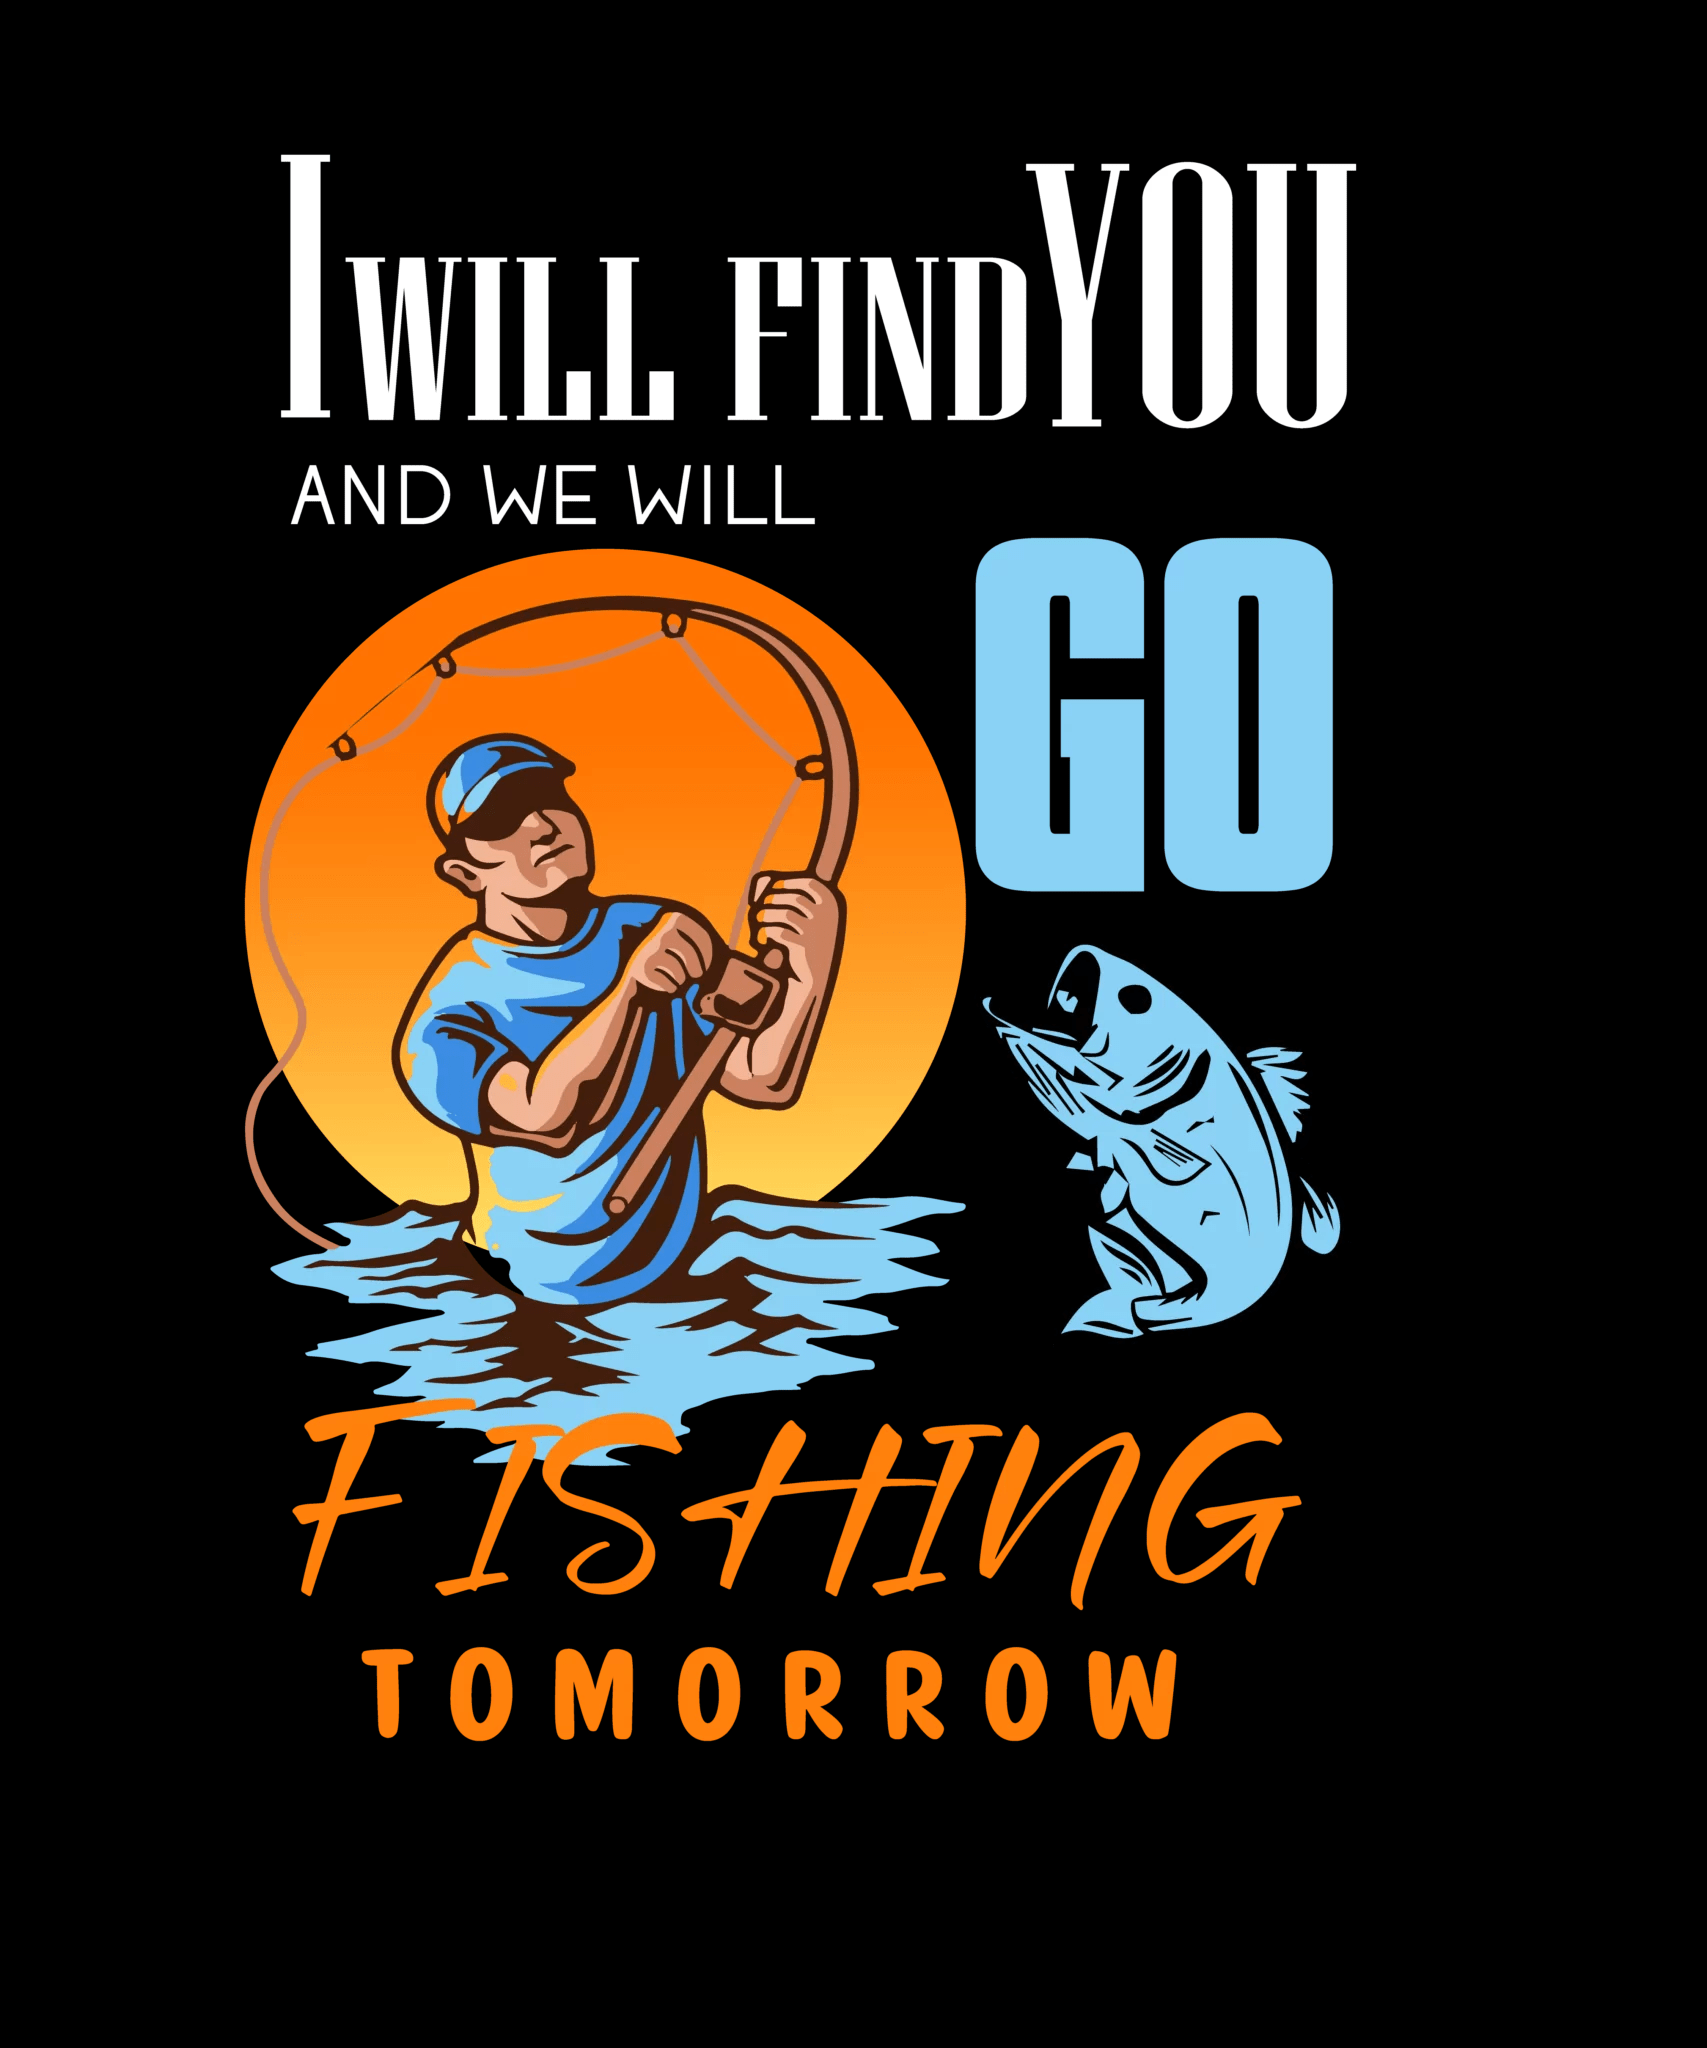 I will find you and we will go fishing tomorrow t shirt design